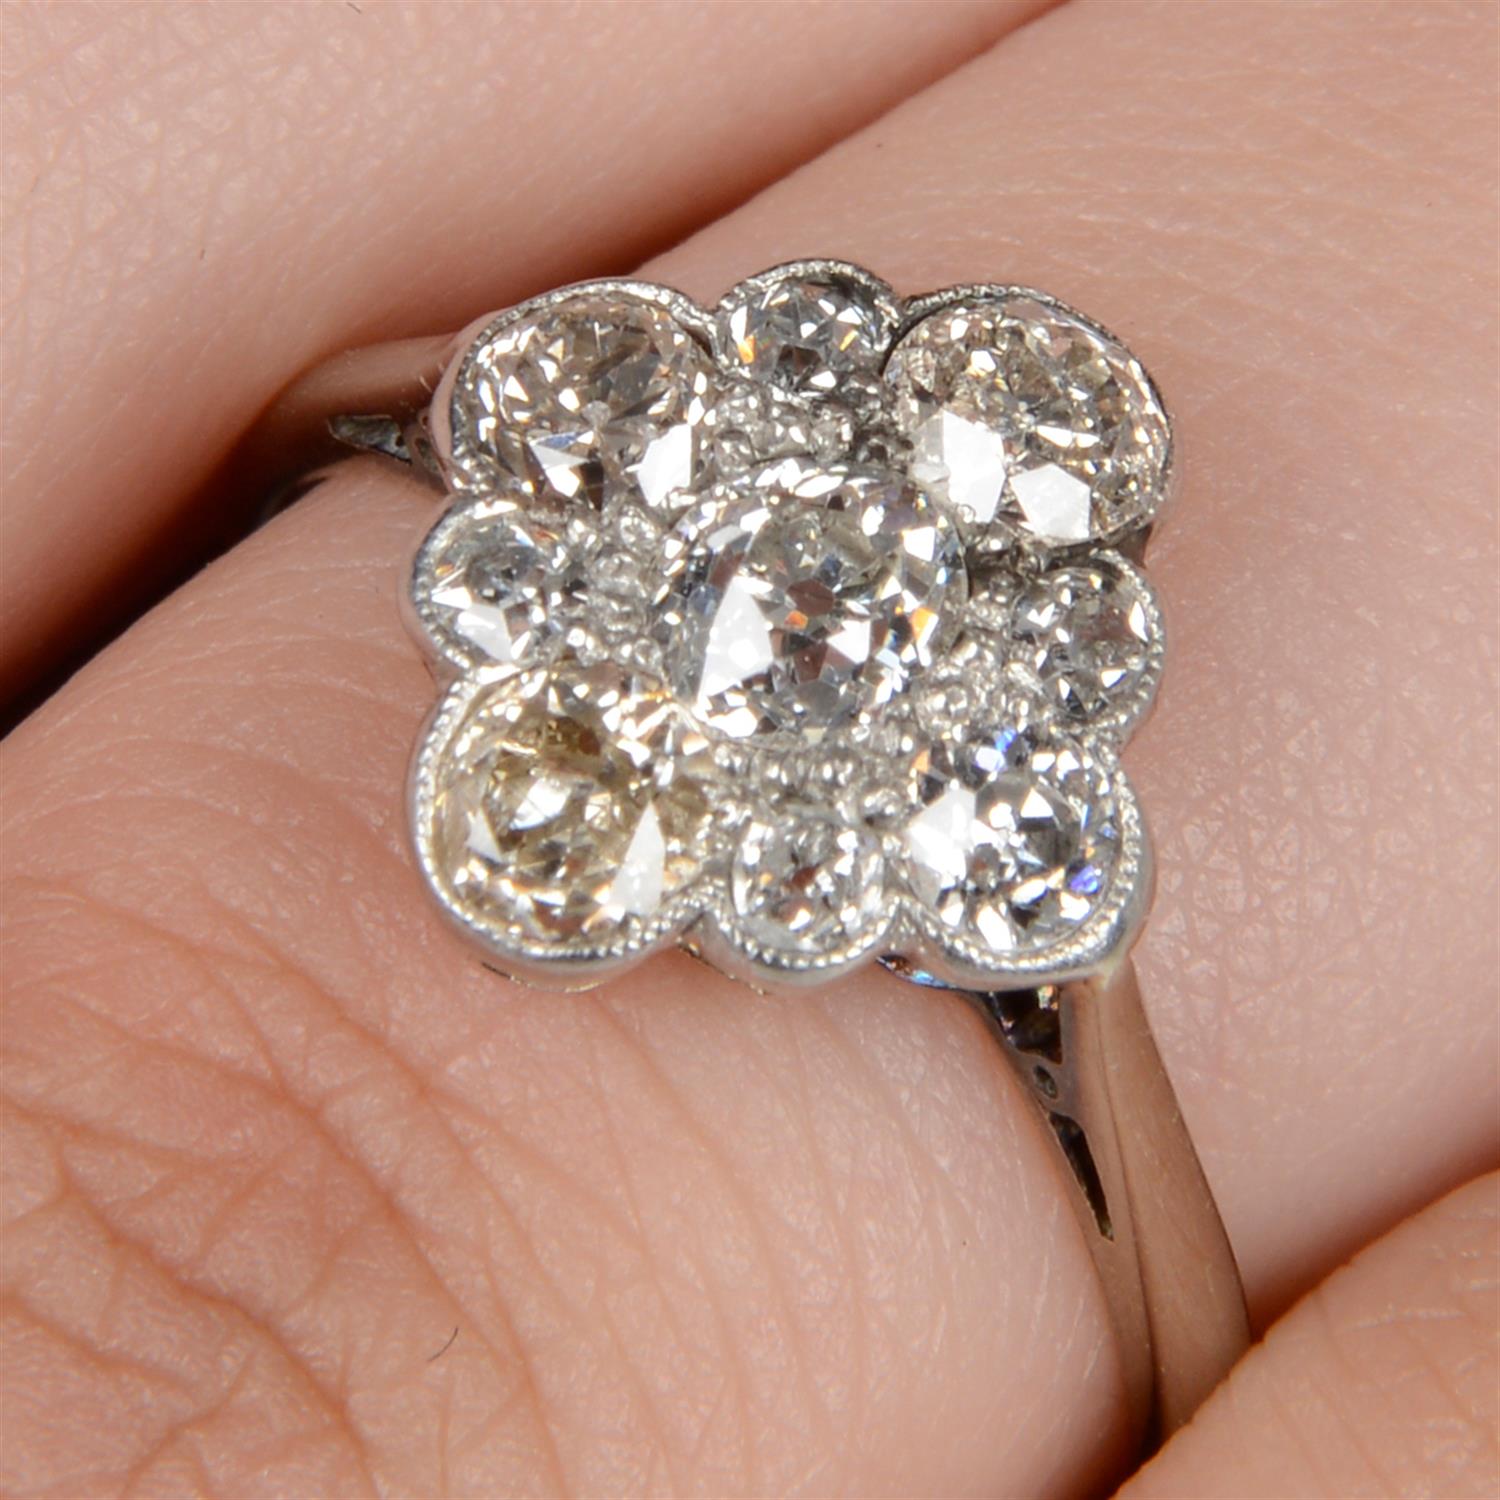 Early 20th century old-cut diamond cluster ring